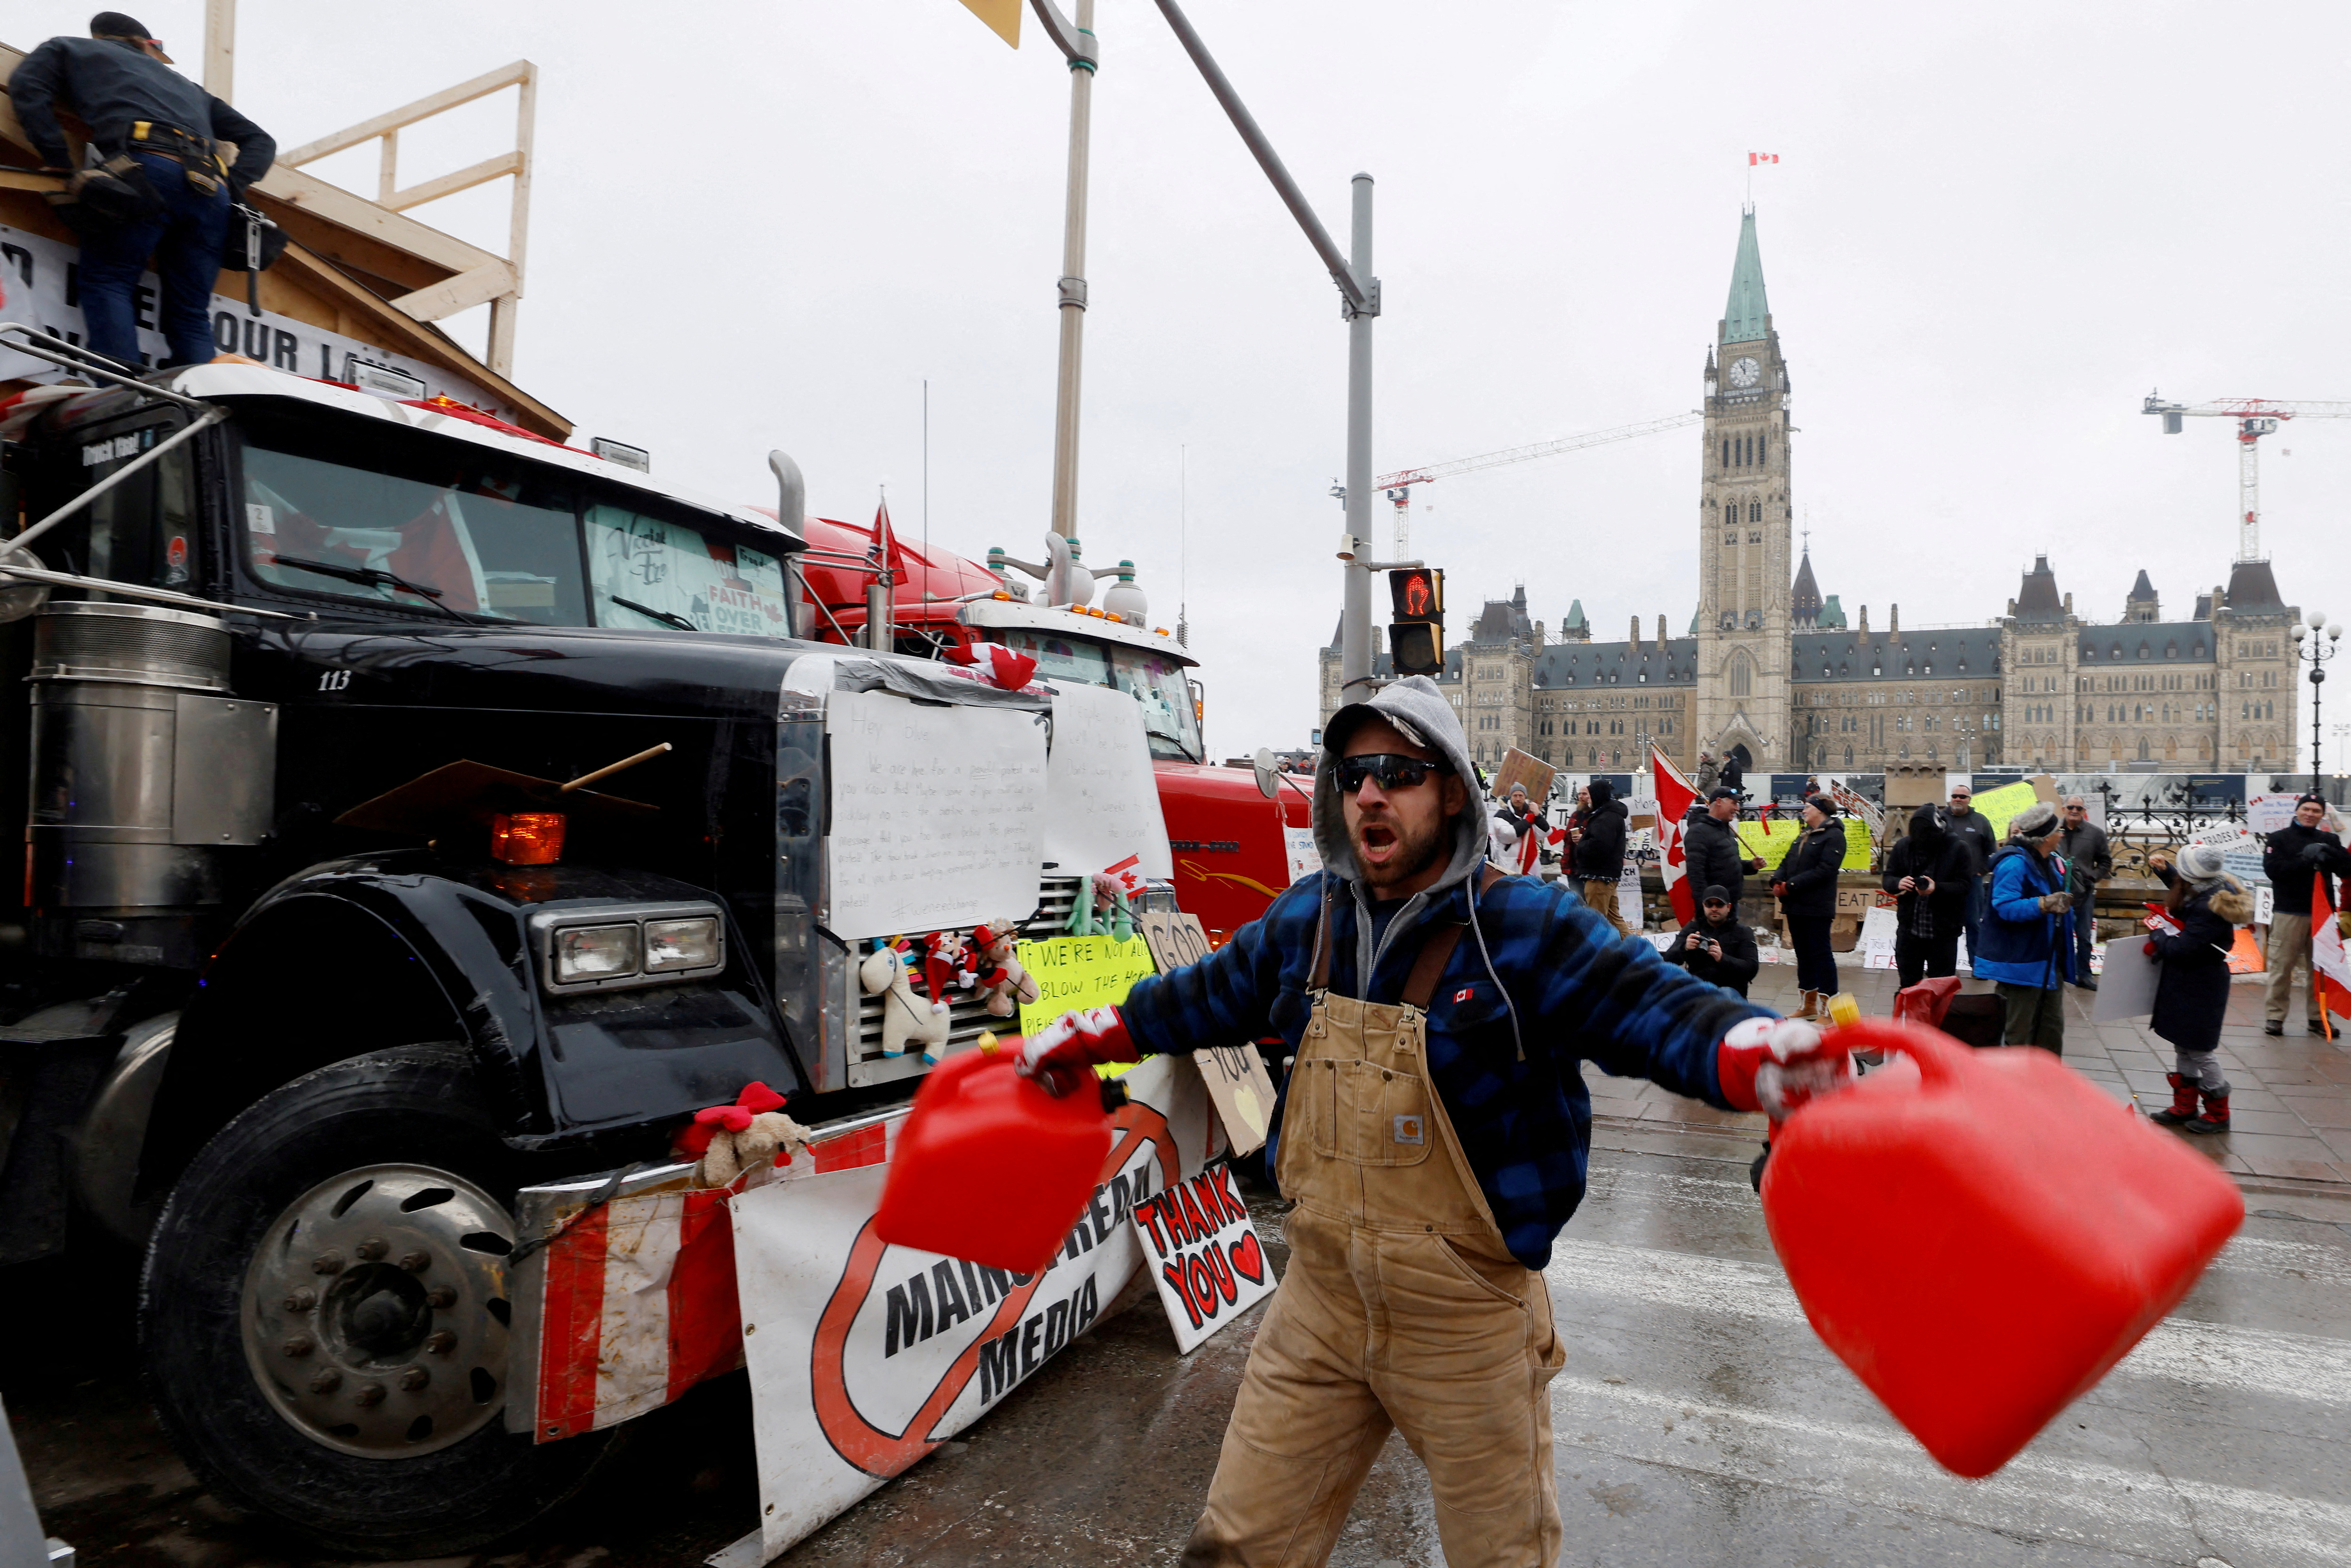 Truckers and supporters continue to protest COVID-19 vaccine mandates in Ottawa